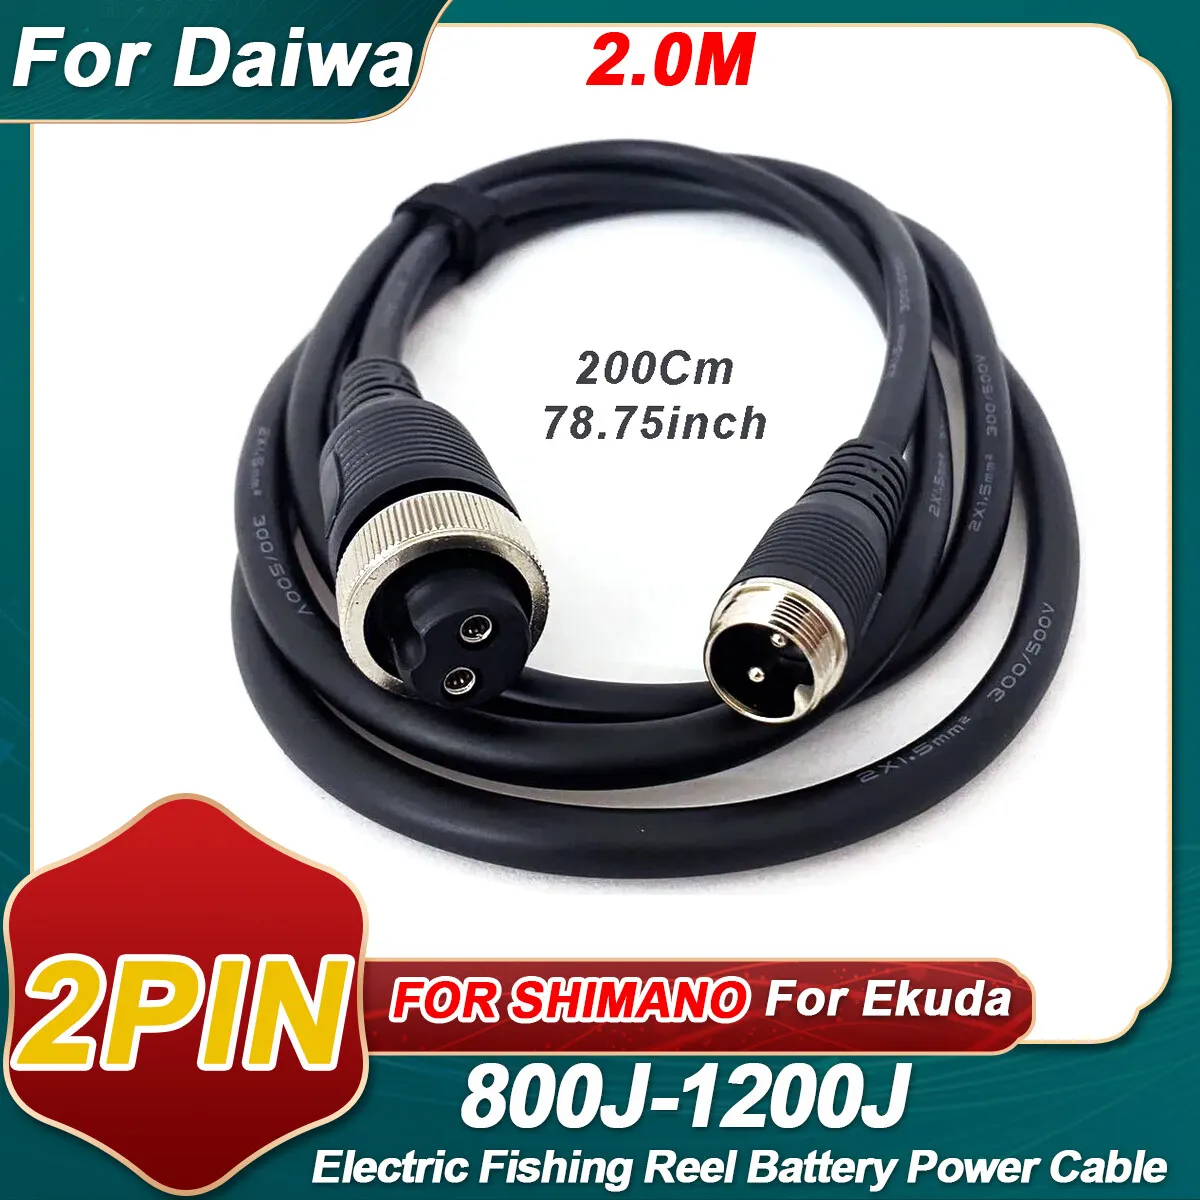 2.0M Power Cable For Daiwa 1200MJ 1200J 800MJ 800MJS Electric Reel Cord  2-Pin Genuine 